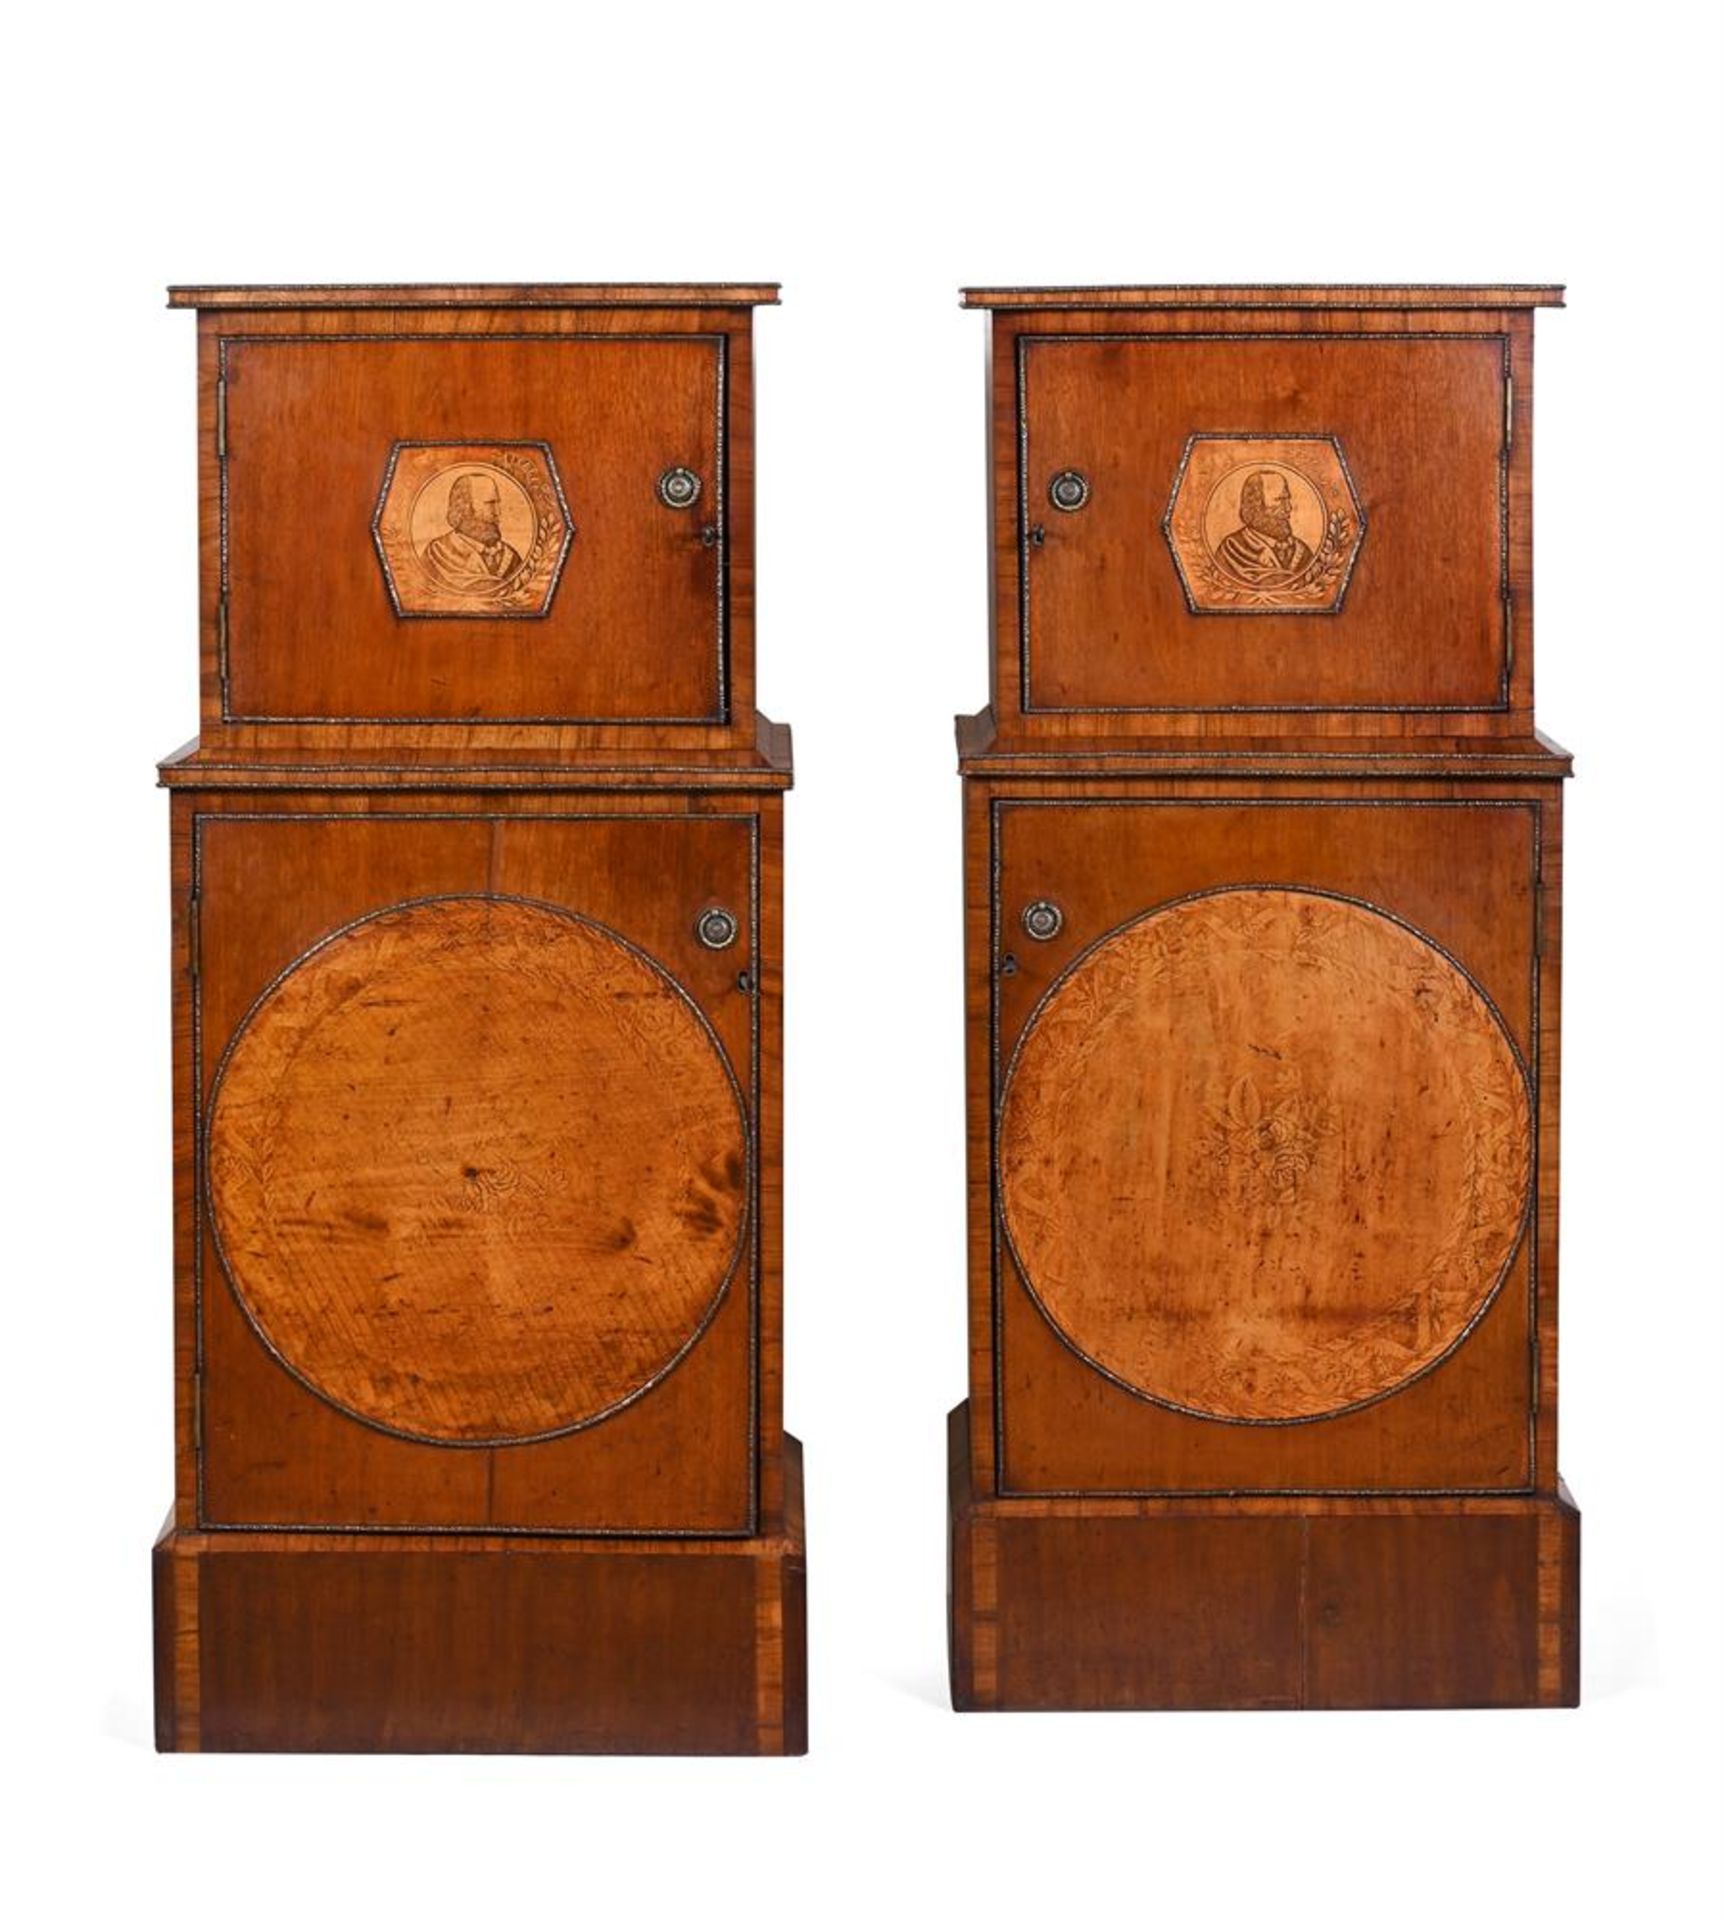 Y A PAIR ITALIAN MAHOGANY, TULIPWOOD, INLAID AND GILT METAL MOUNTED PEDESTAL CUPBAORDS, 19TH CENTURY